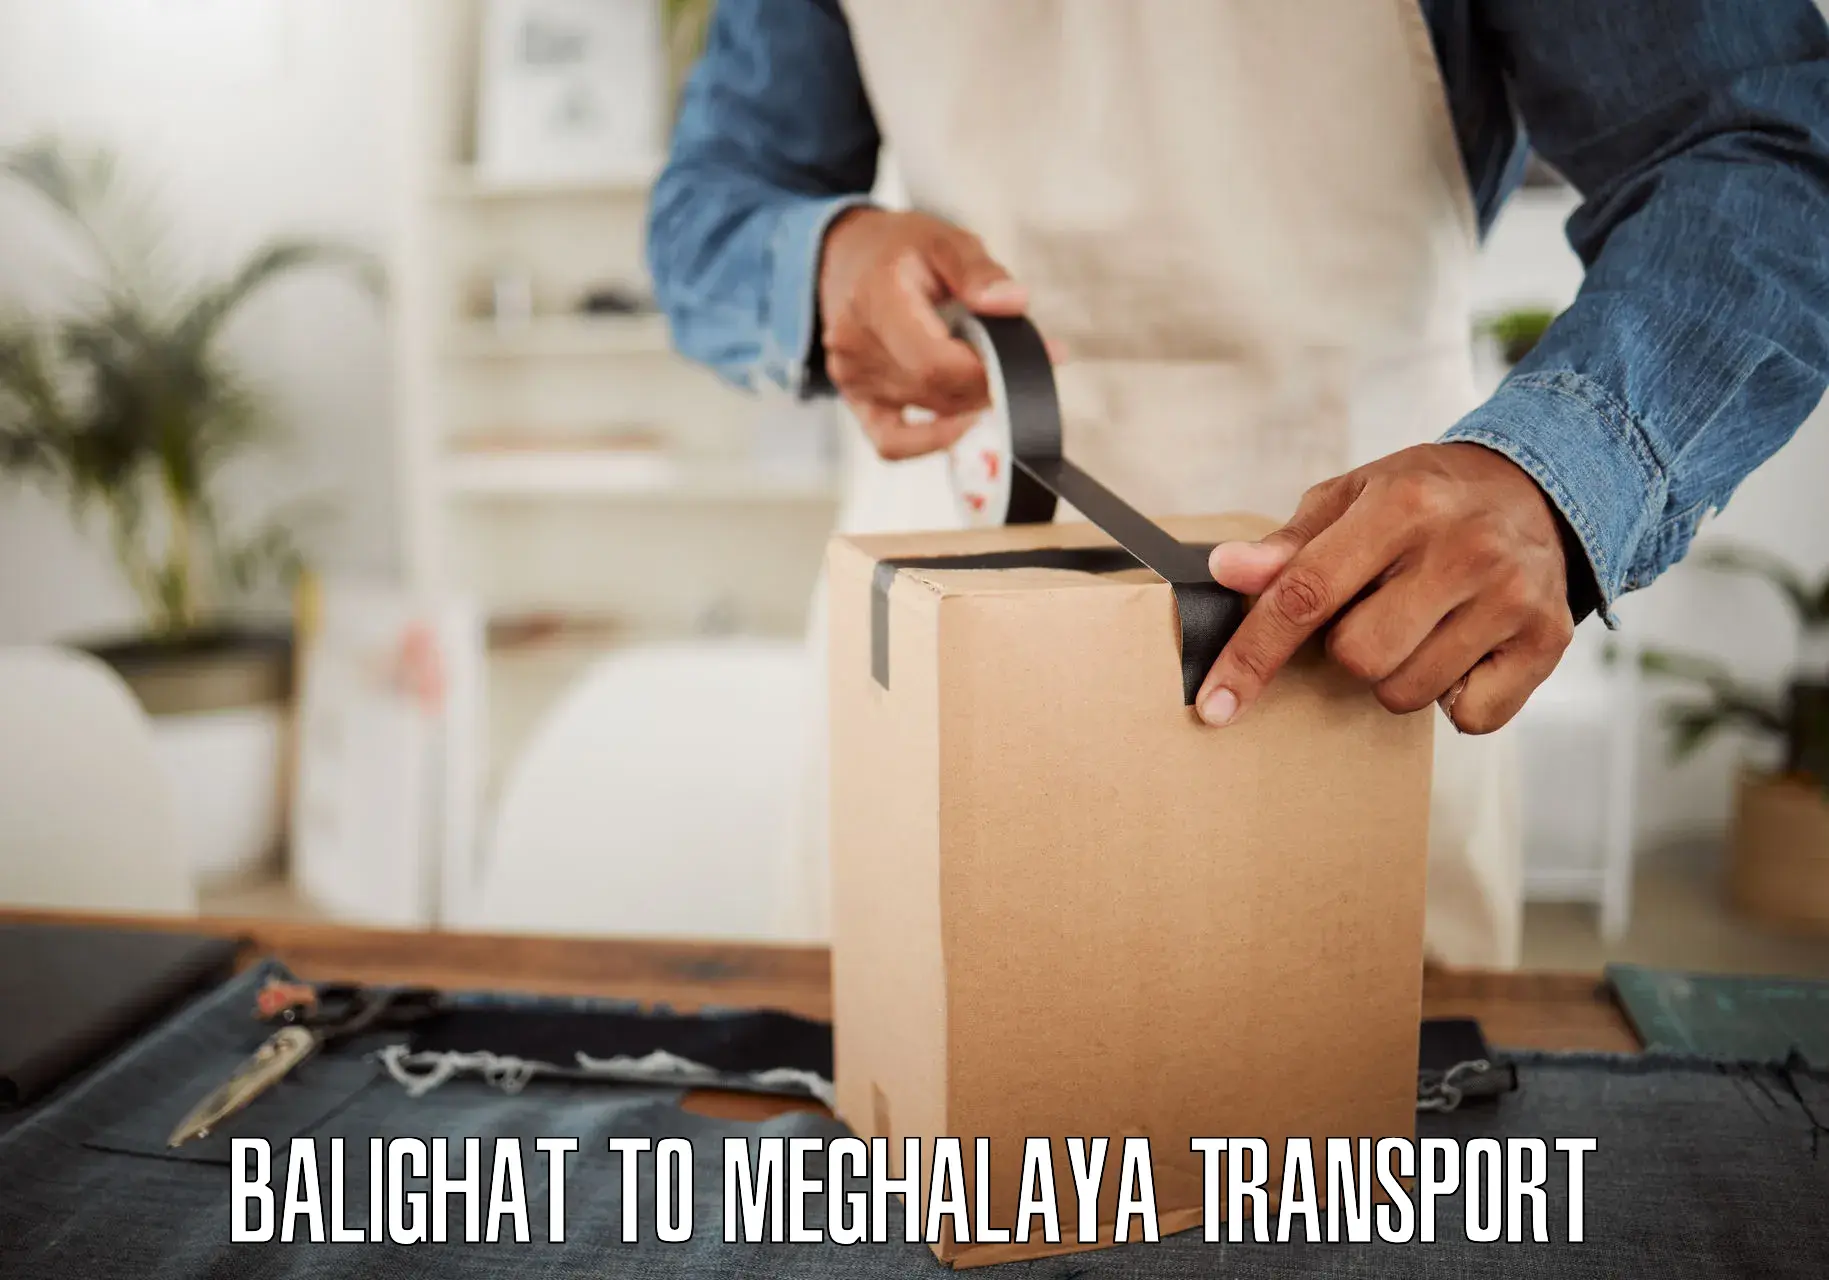 Delivery service Balighat to Meghalaya